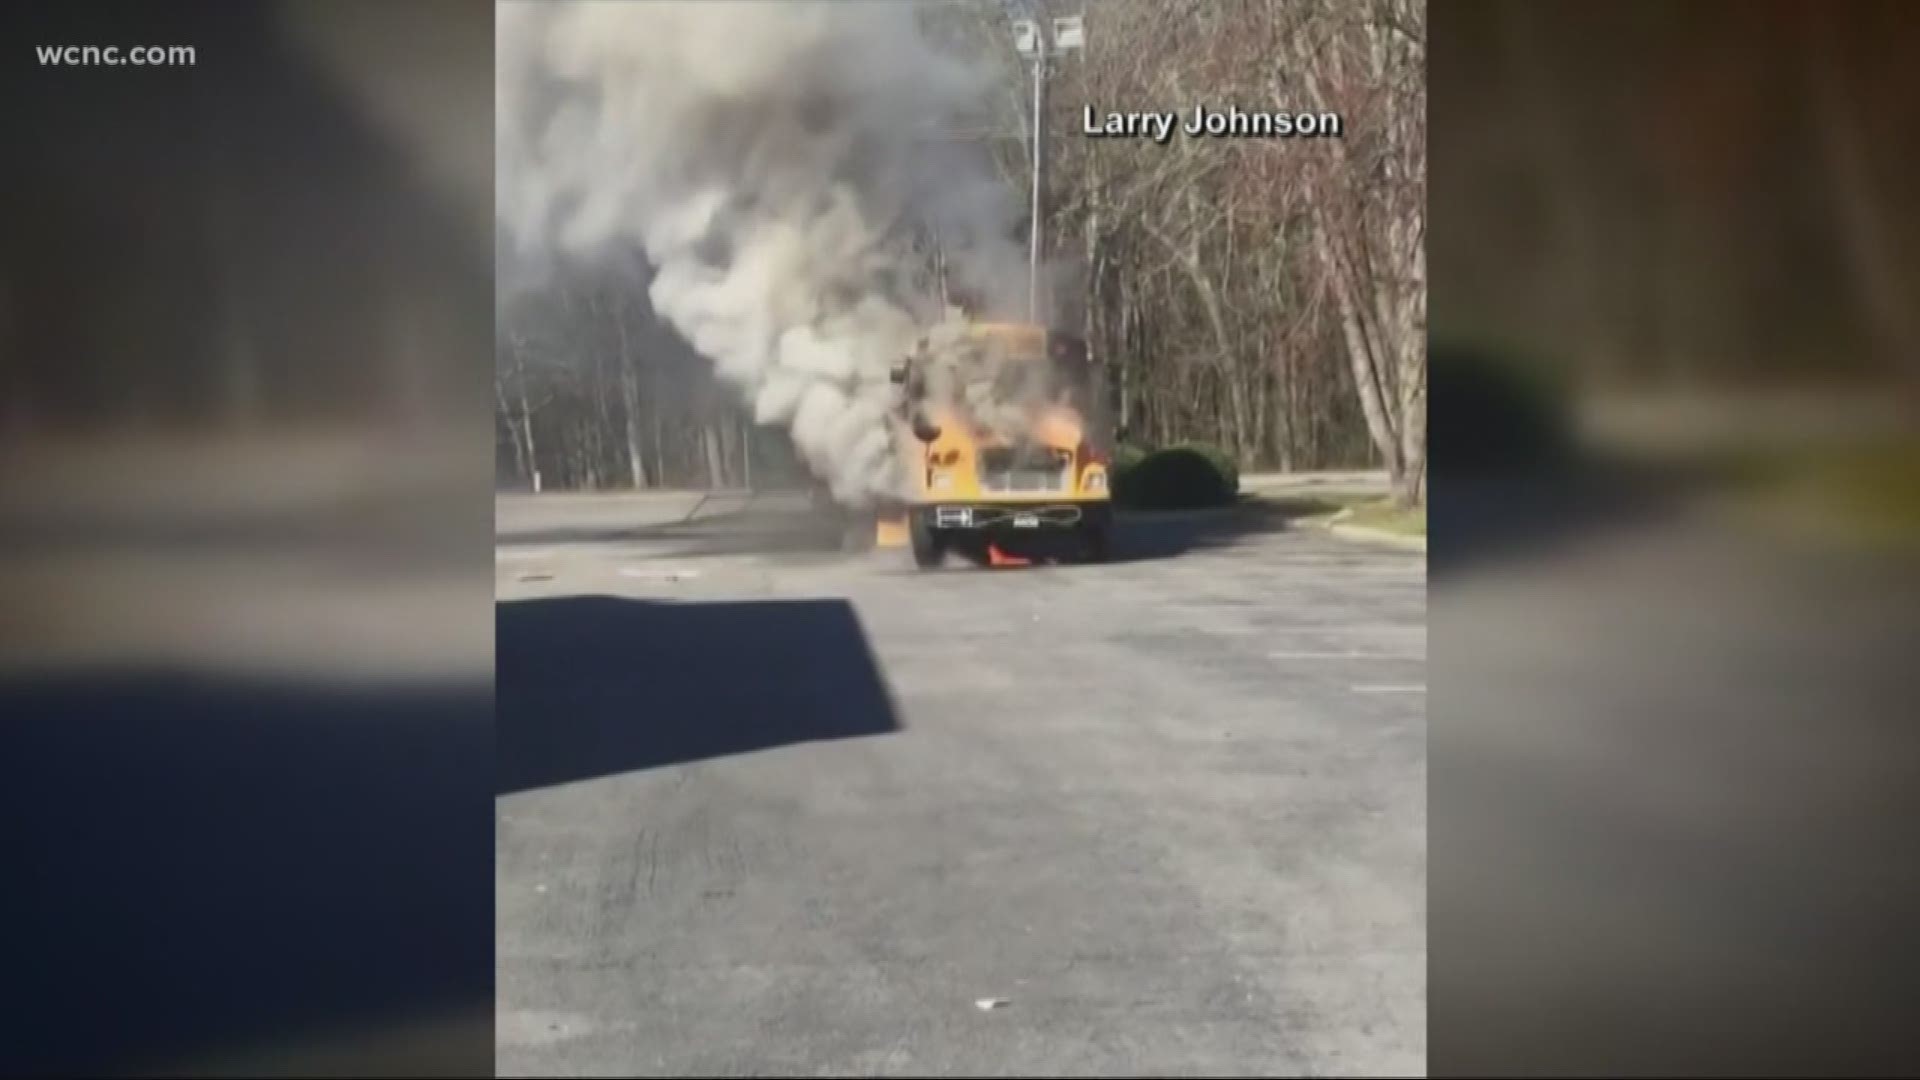 The kids were on their way to a field trip when the bus started having some mechanical issues. The students, parents and teachers were able to get off just before the bus caught fire.